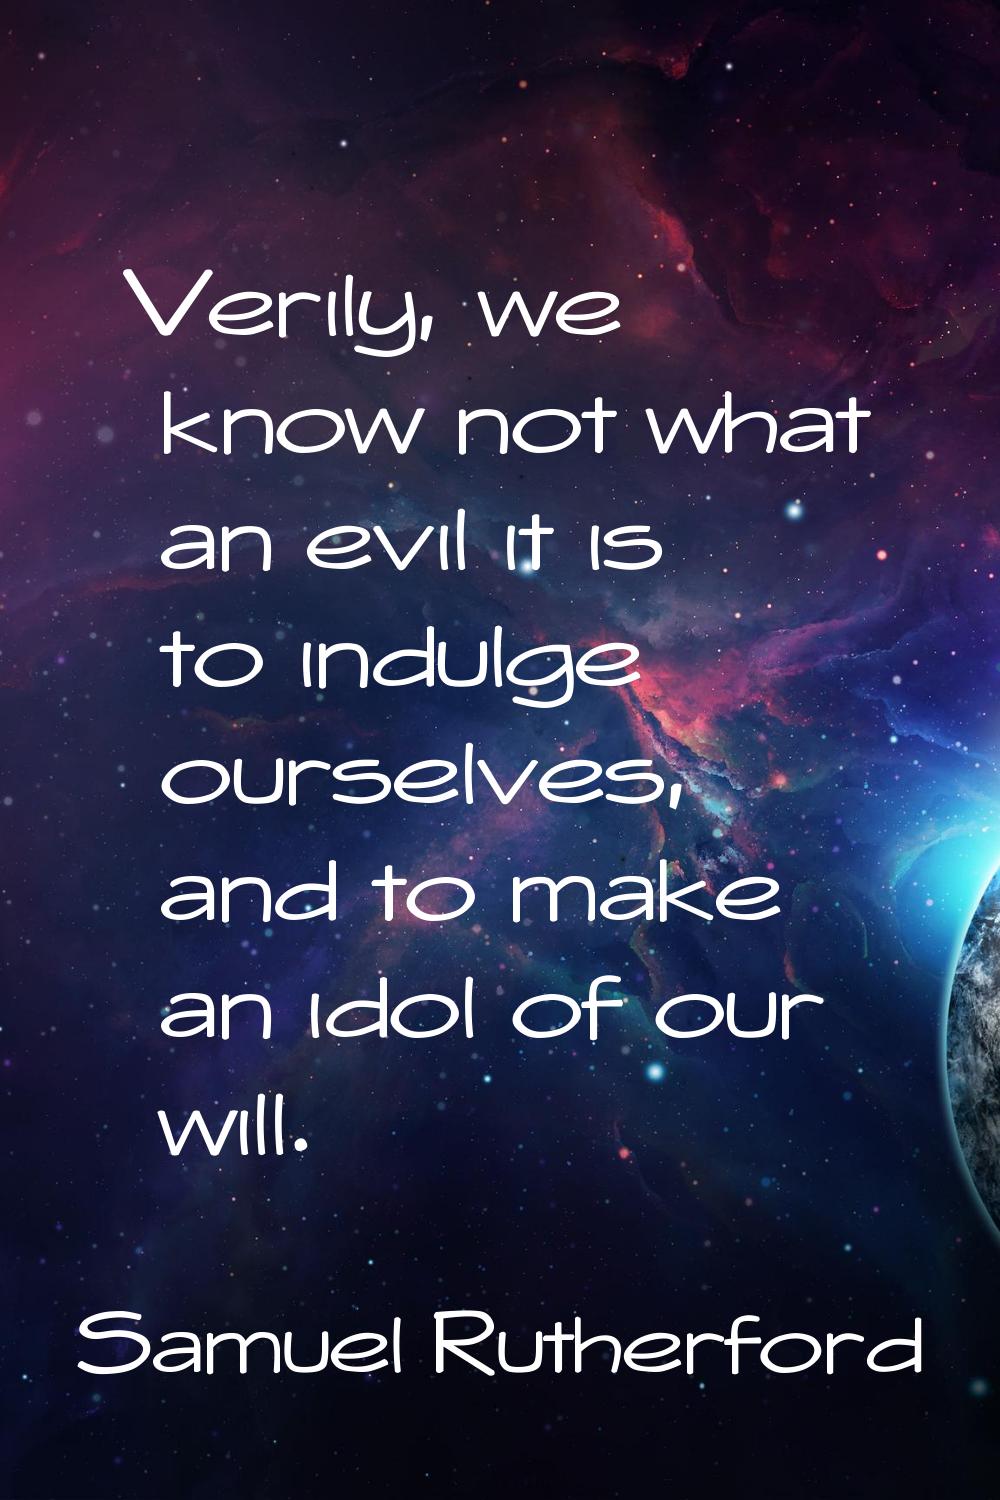 Verily, we know not what an evil it is to indulge ourselves, and to make an idol of our will.